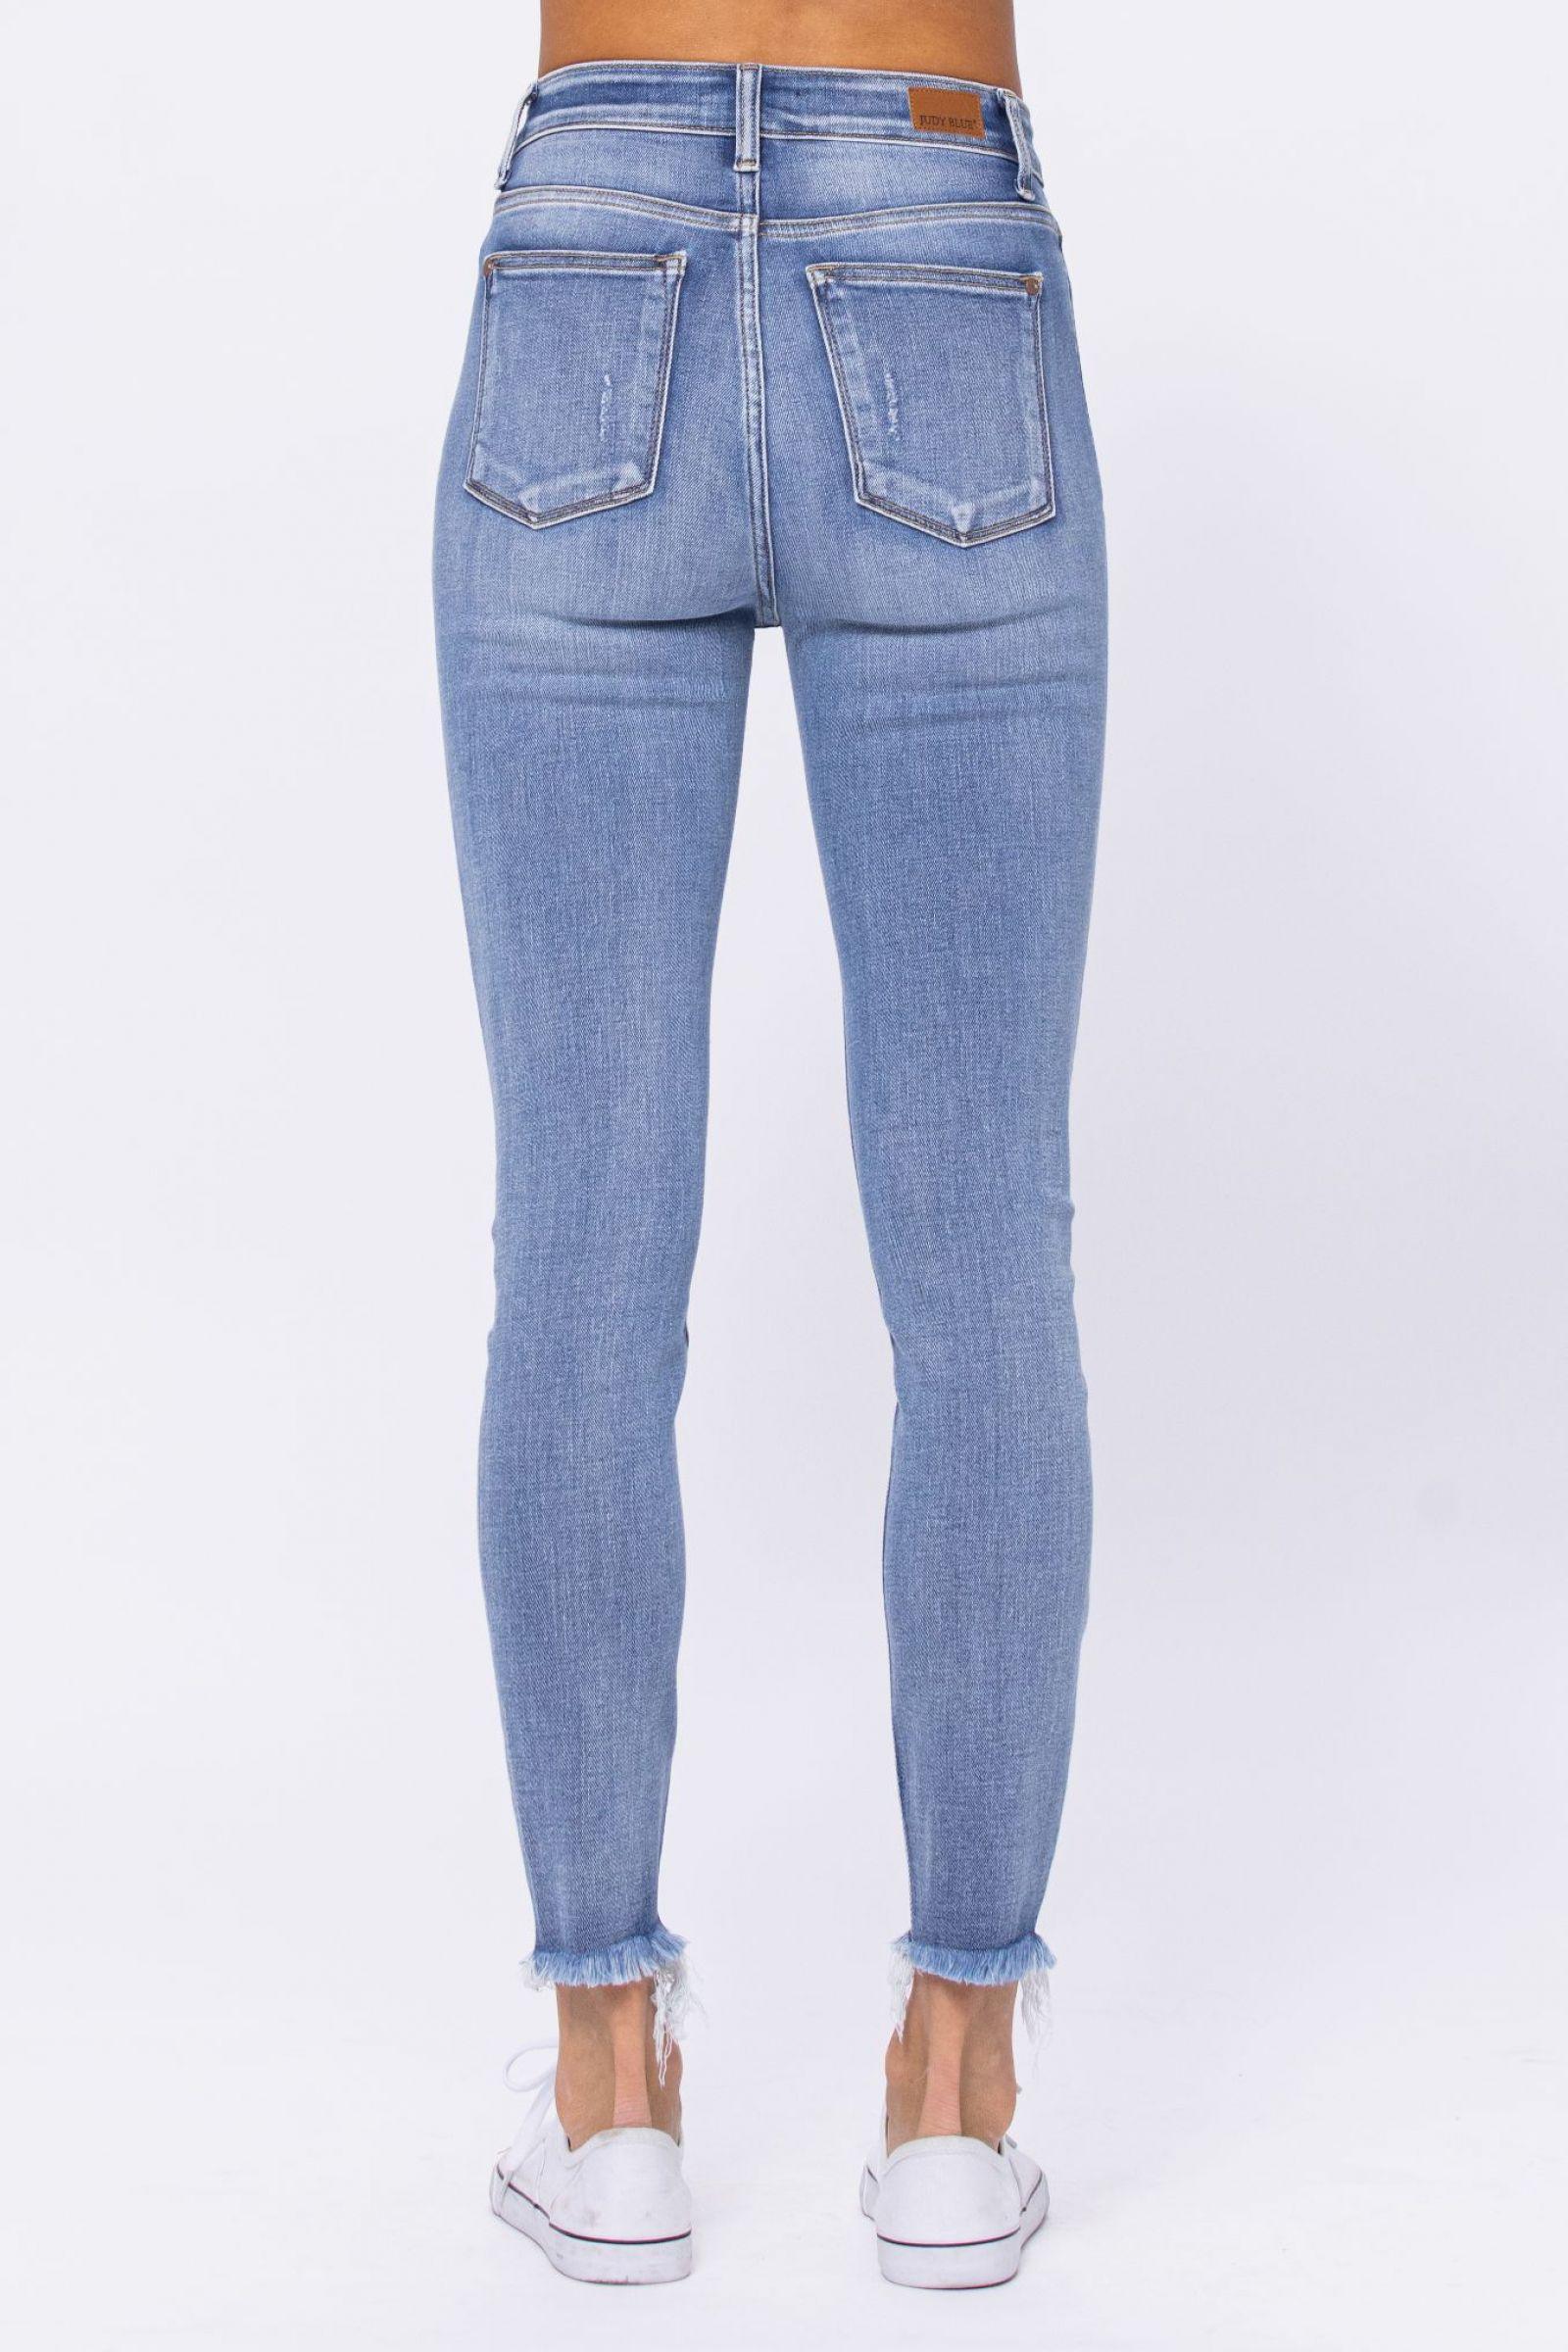 Judy Blue Hi-Rise Destructed Buttonfly Jeans - Strawberry Moon Boutique